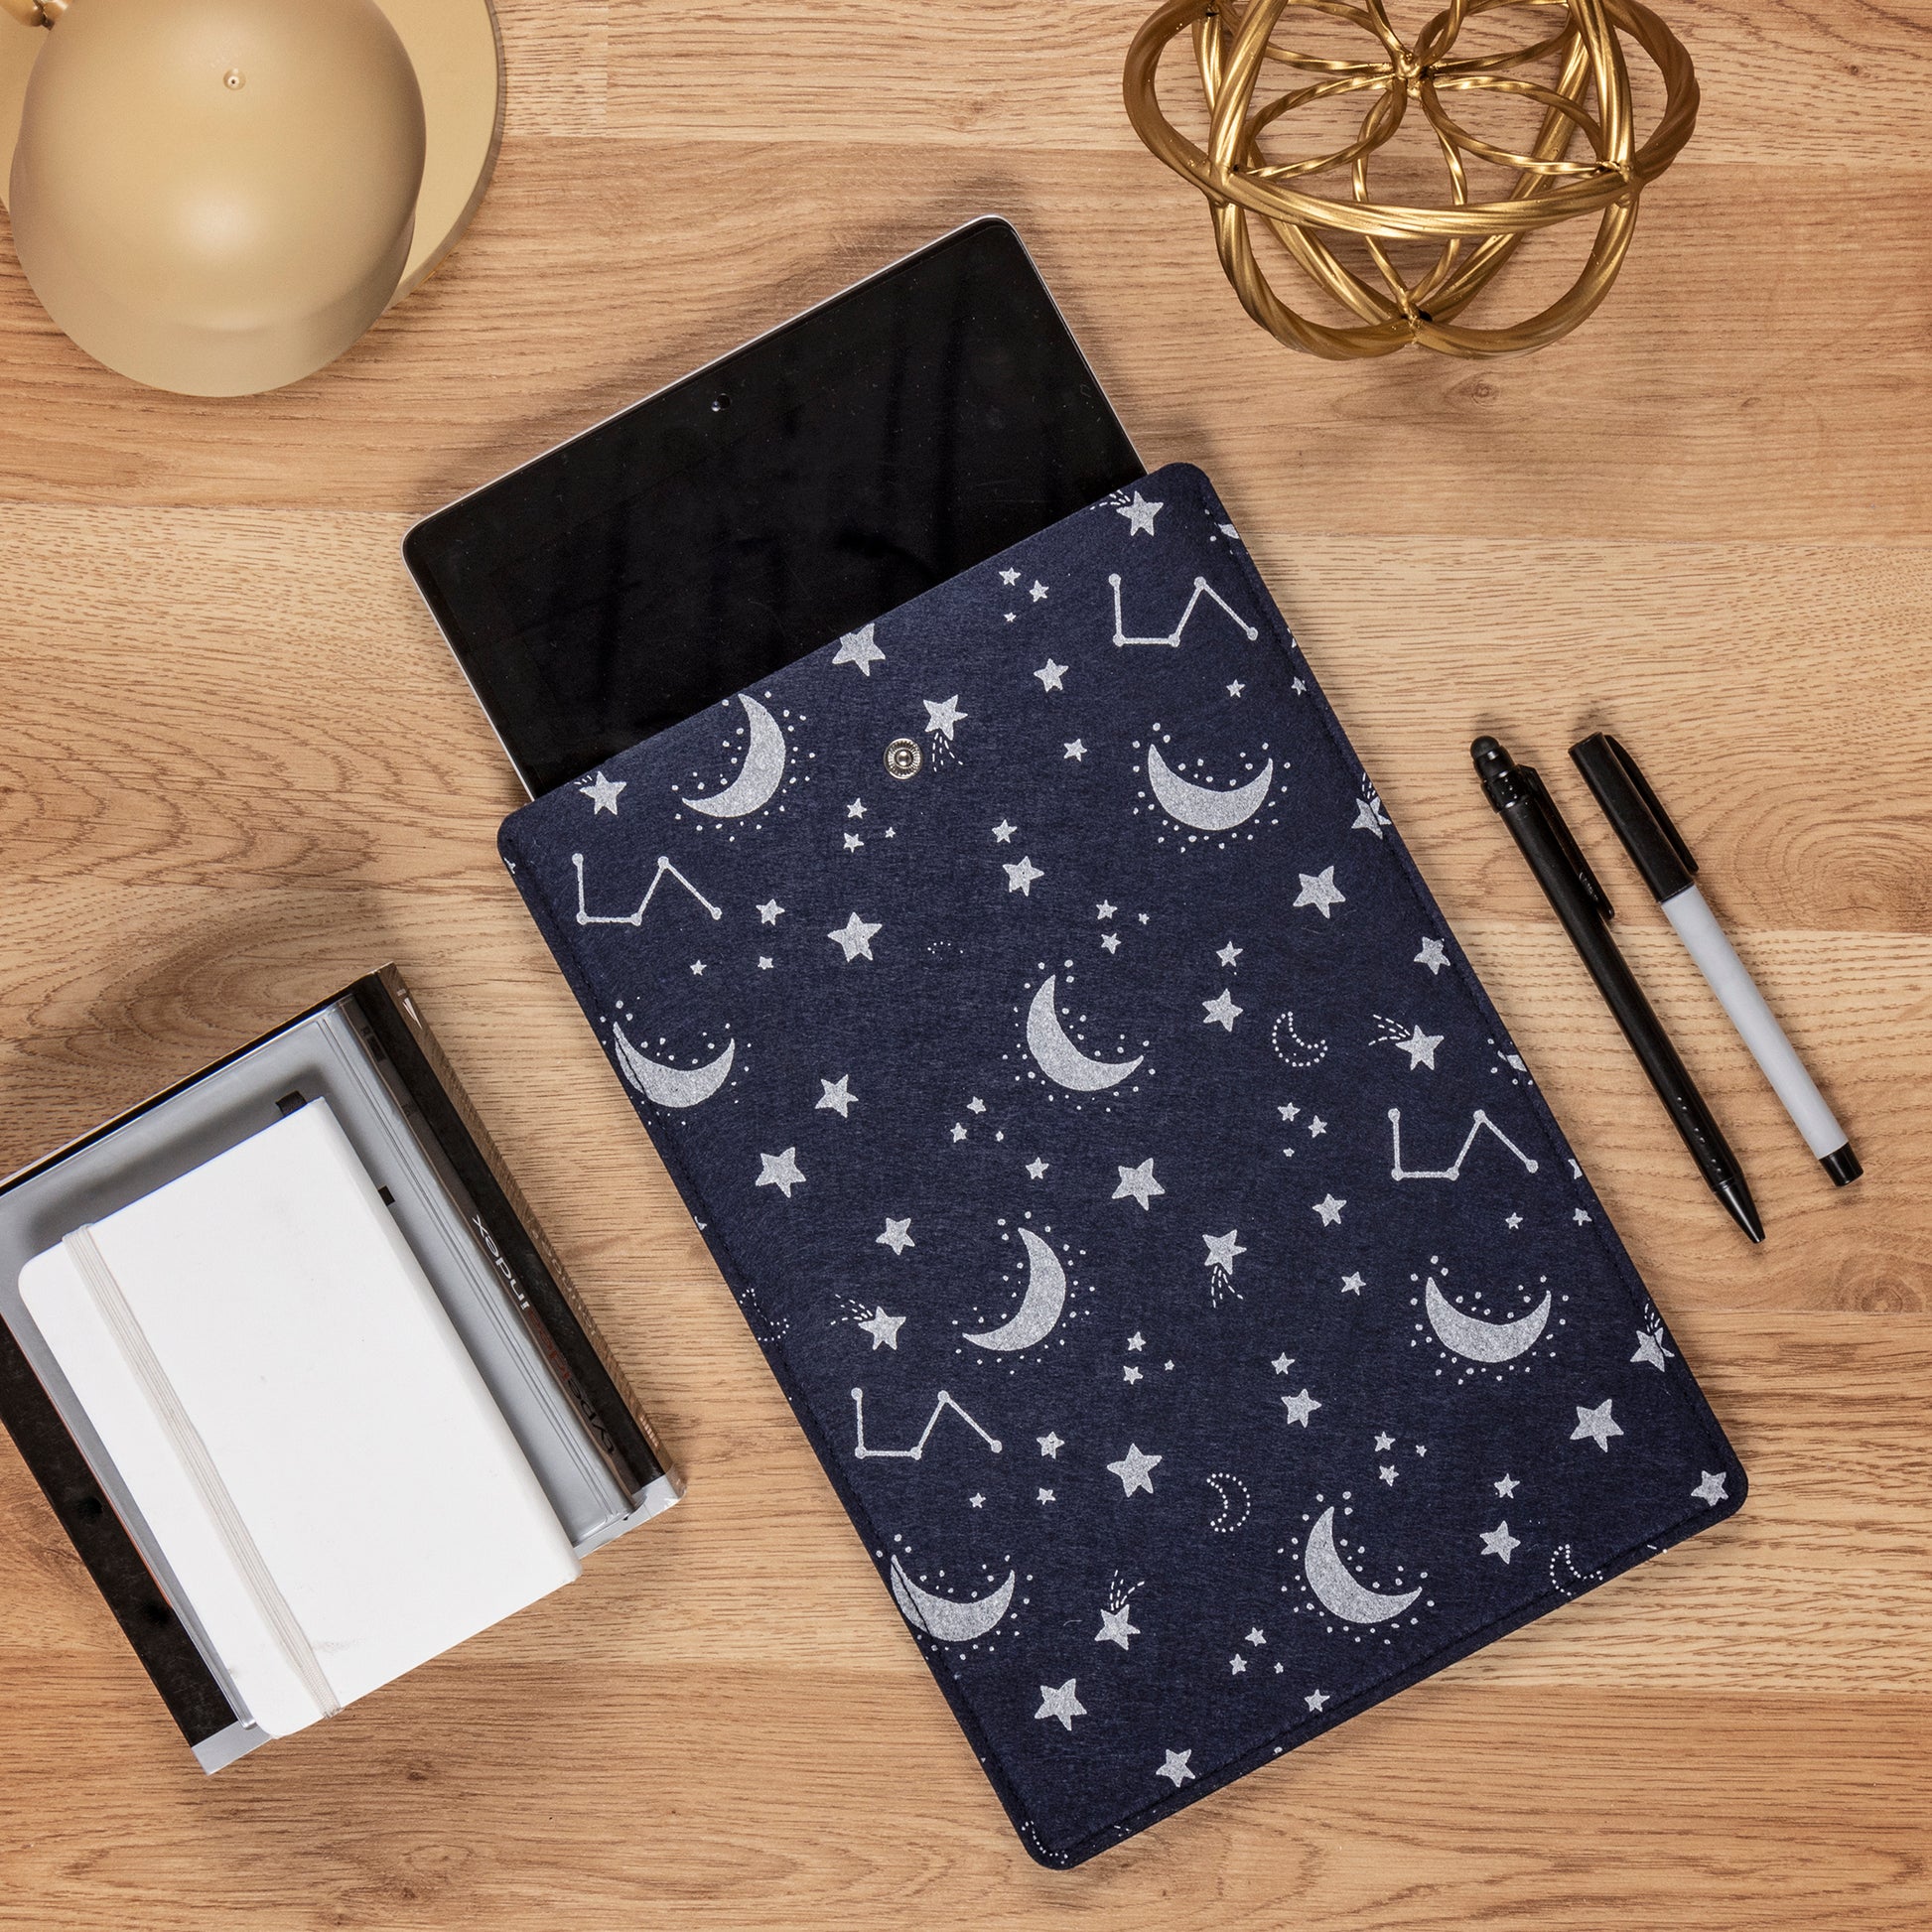  Constellation Felt Tablet Sleeve Carrying Case stylized room image